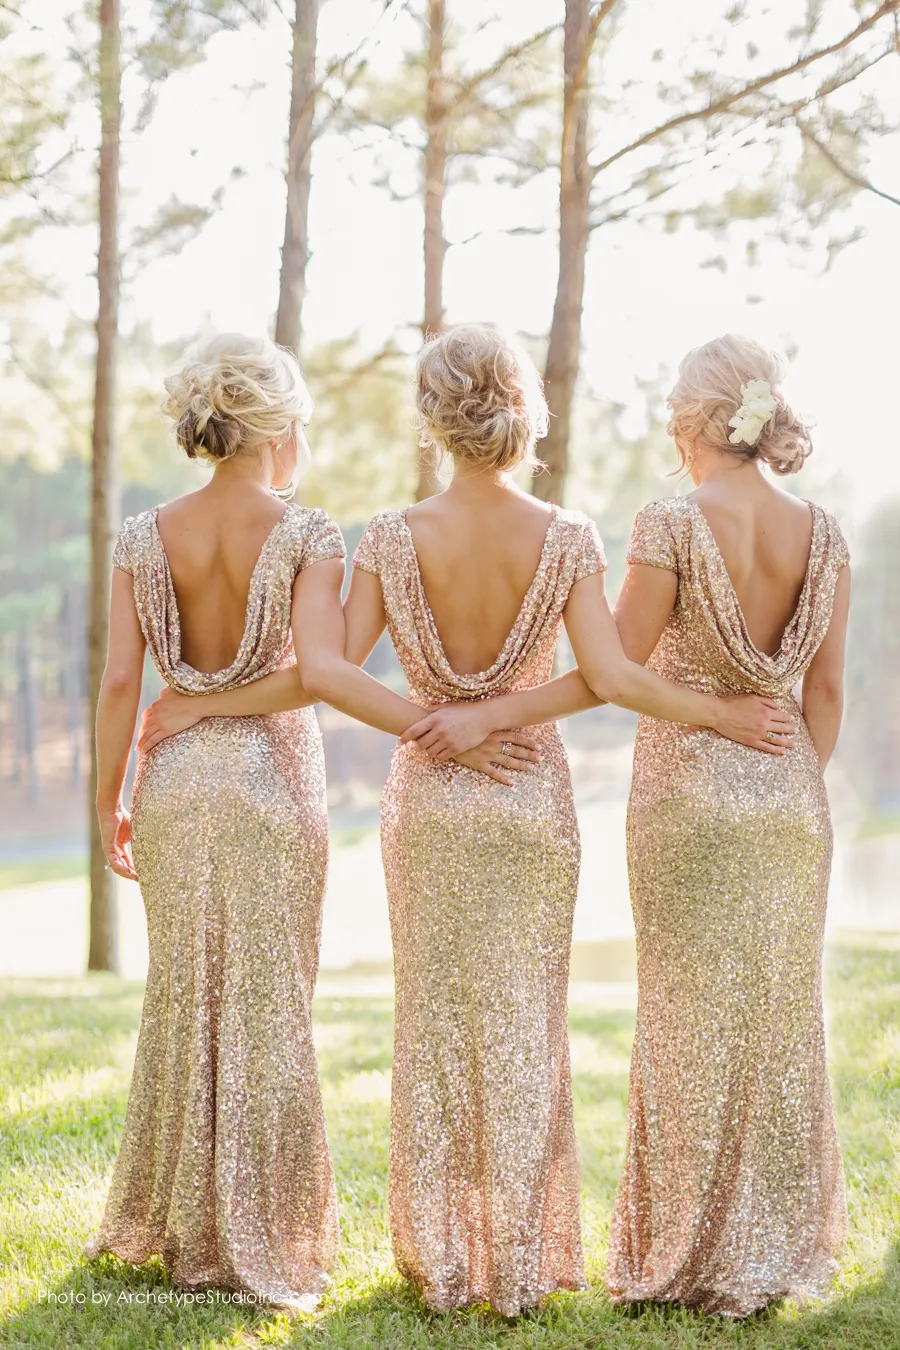  Sparkly Rose Gold Cheap 2015 Mermaid Bridesmaid Dresses 2016 Short Sleeve Sequins Backless Long Beach Wedding Party Gowns Gold Champagne